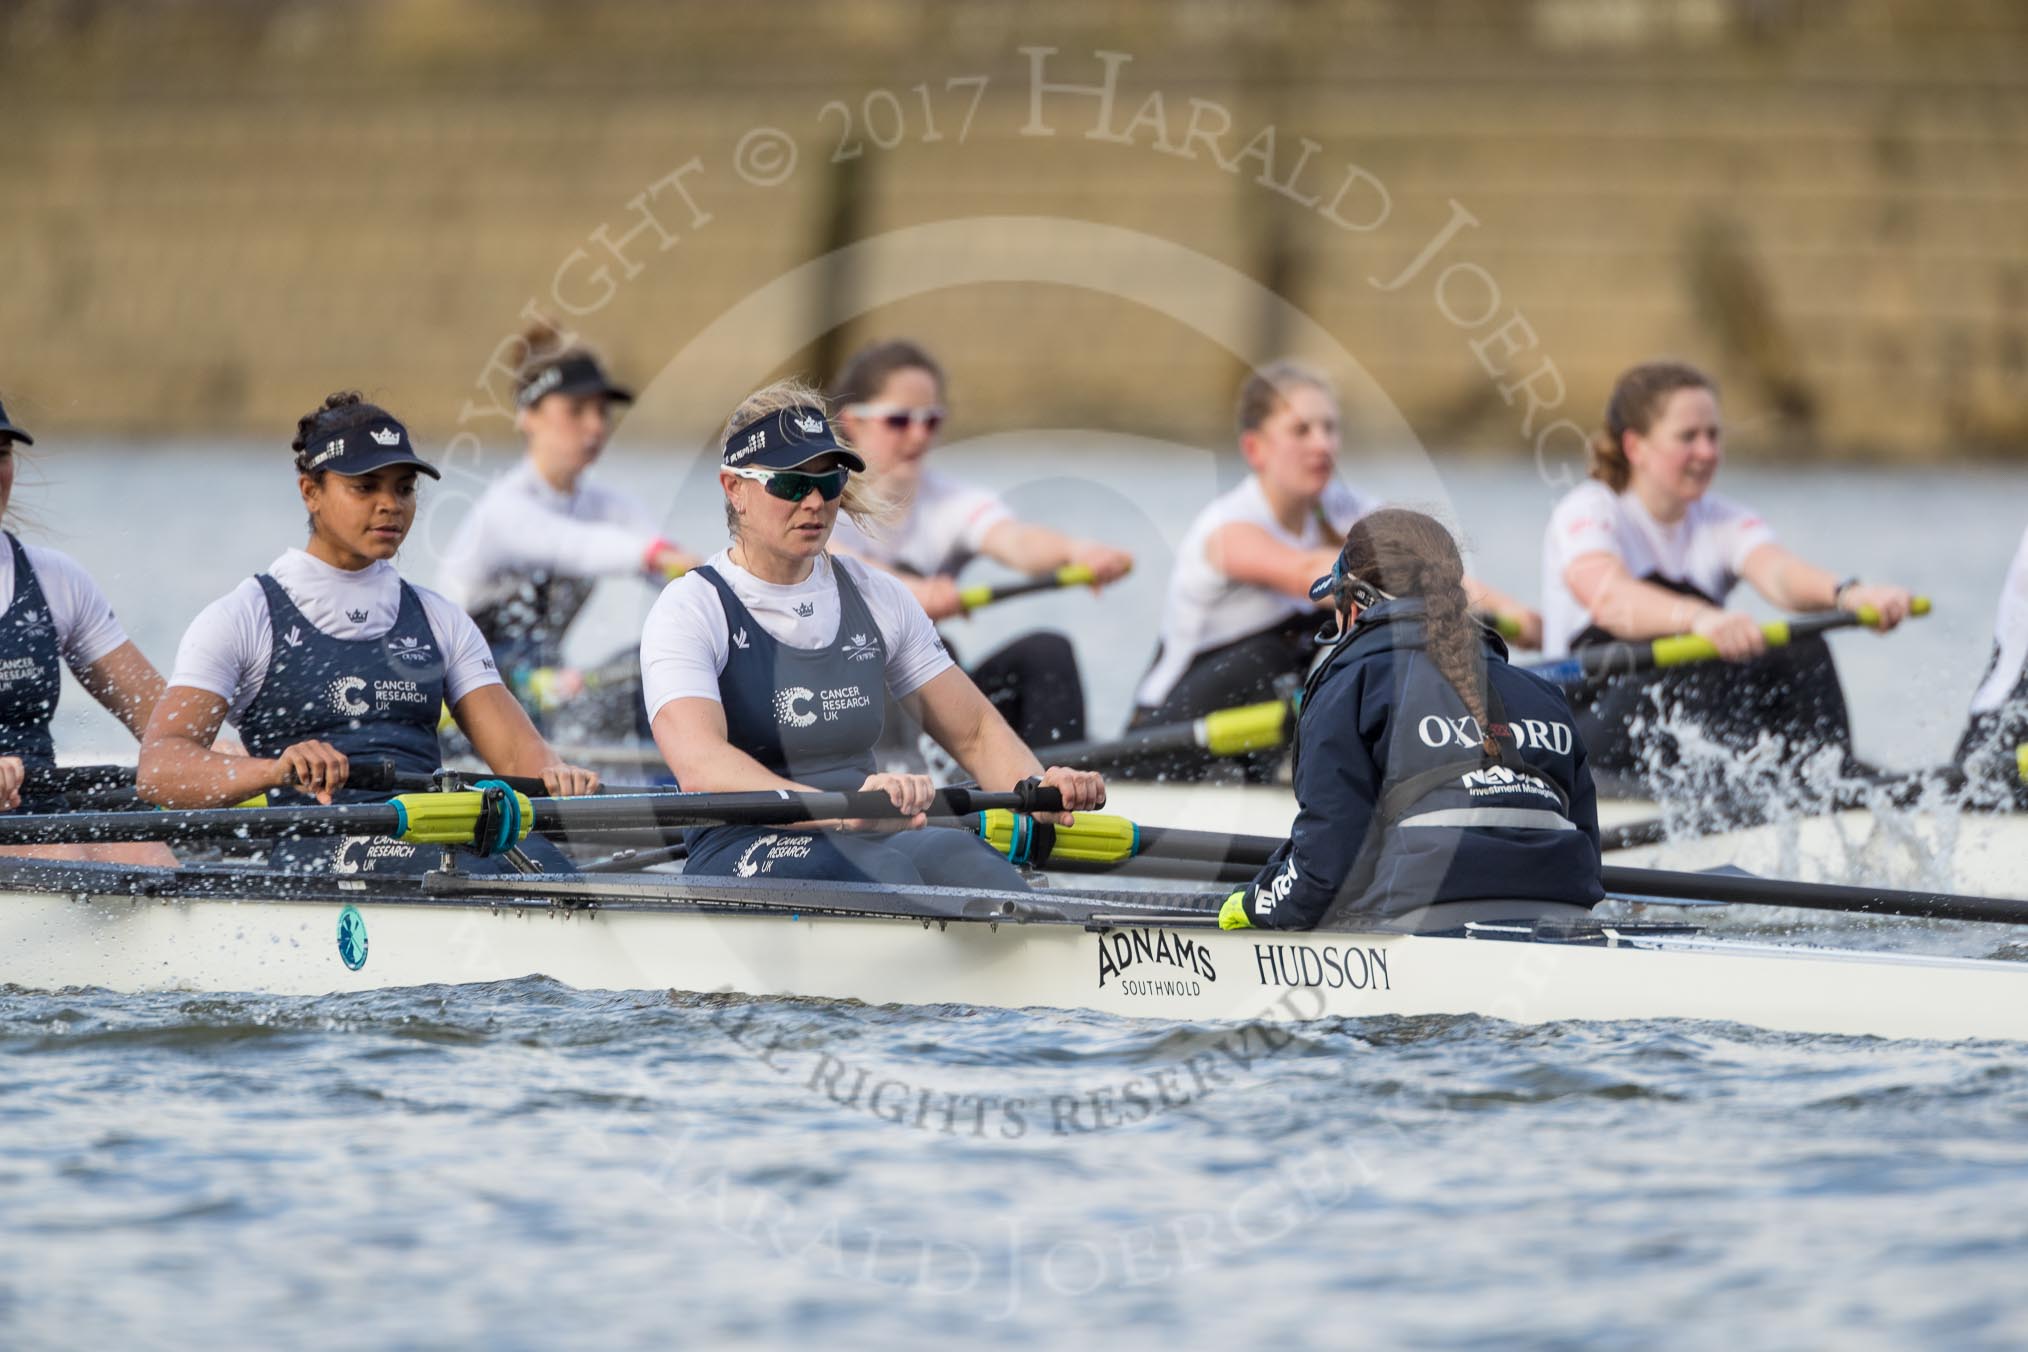 The Cancer Research UK Boat Race season 2017 - Women's Boat Race Fixture OUWBC vs Molesey BC: OUWBC with a lead of around half a length in the milepost area.
River Thames between Putney Bridge and Mortlake,
London SW15,

United Kingdom,
on 19 March 2017 at 16:03, image #66